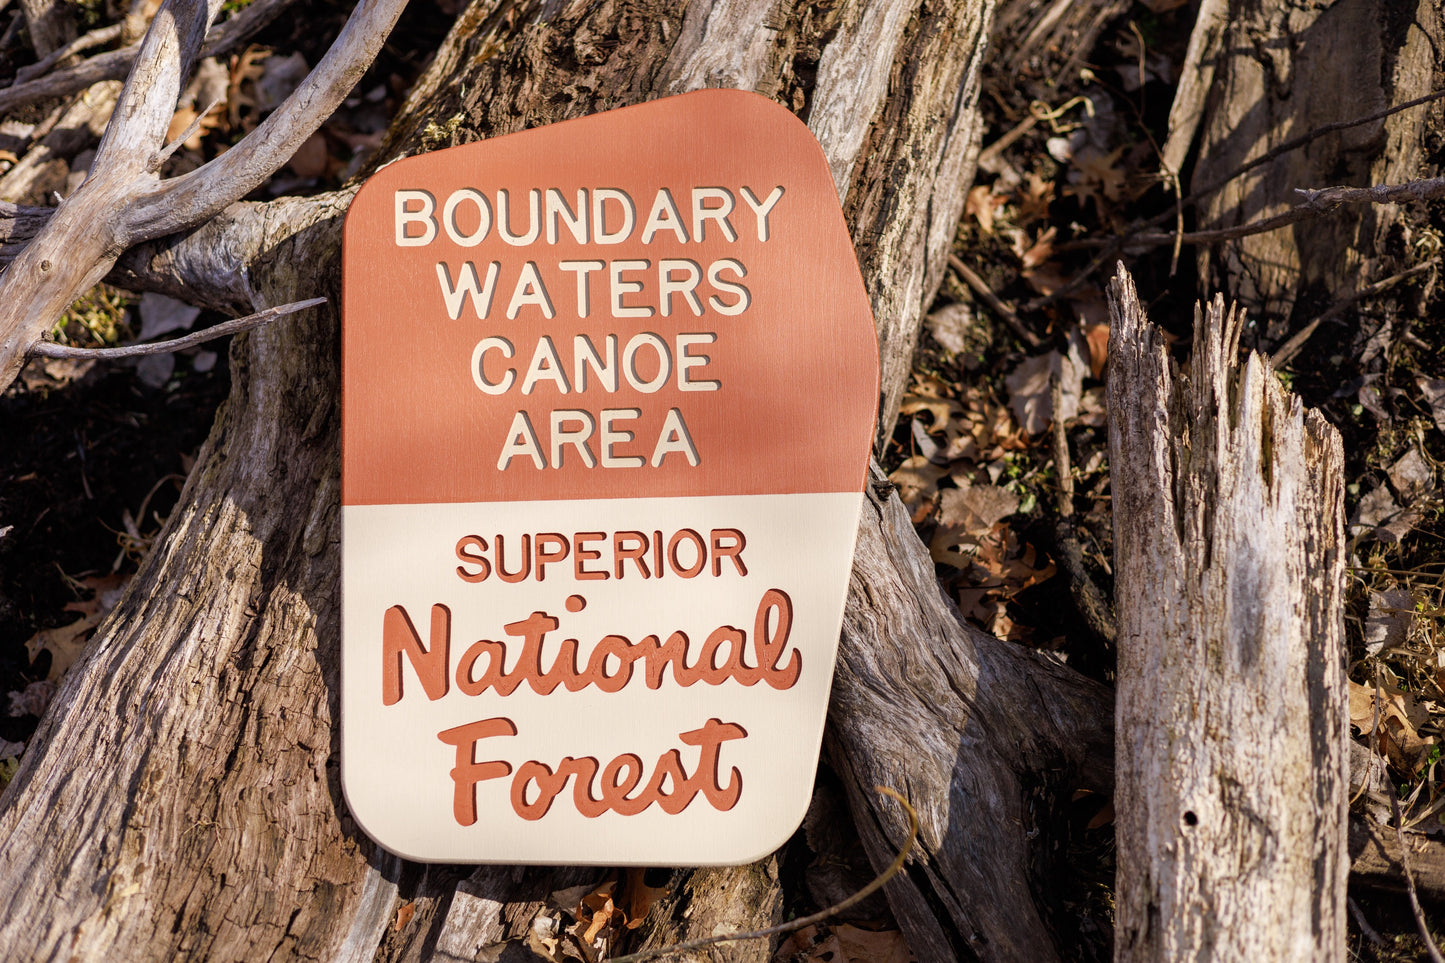 Boundary Waters Canoe Area (BWCA) - Superior National Forest Replica Sign